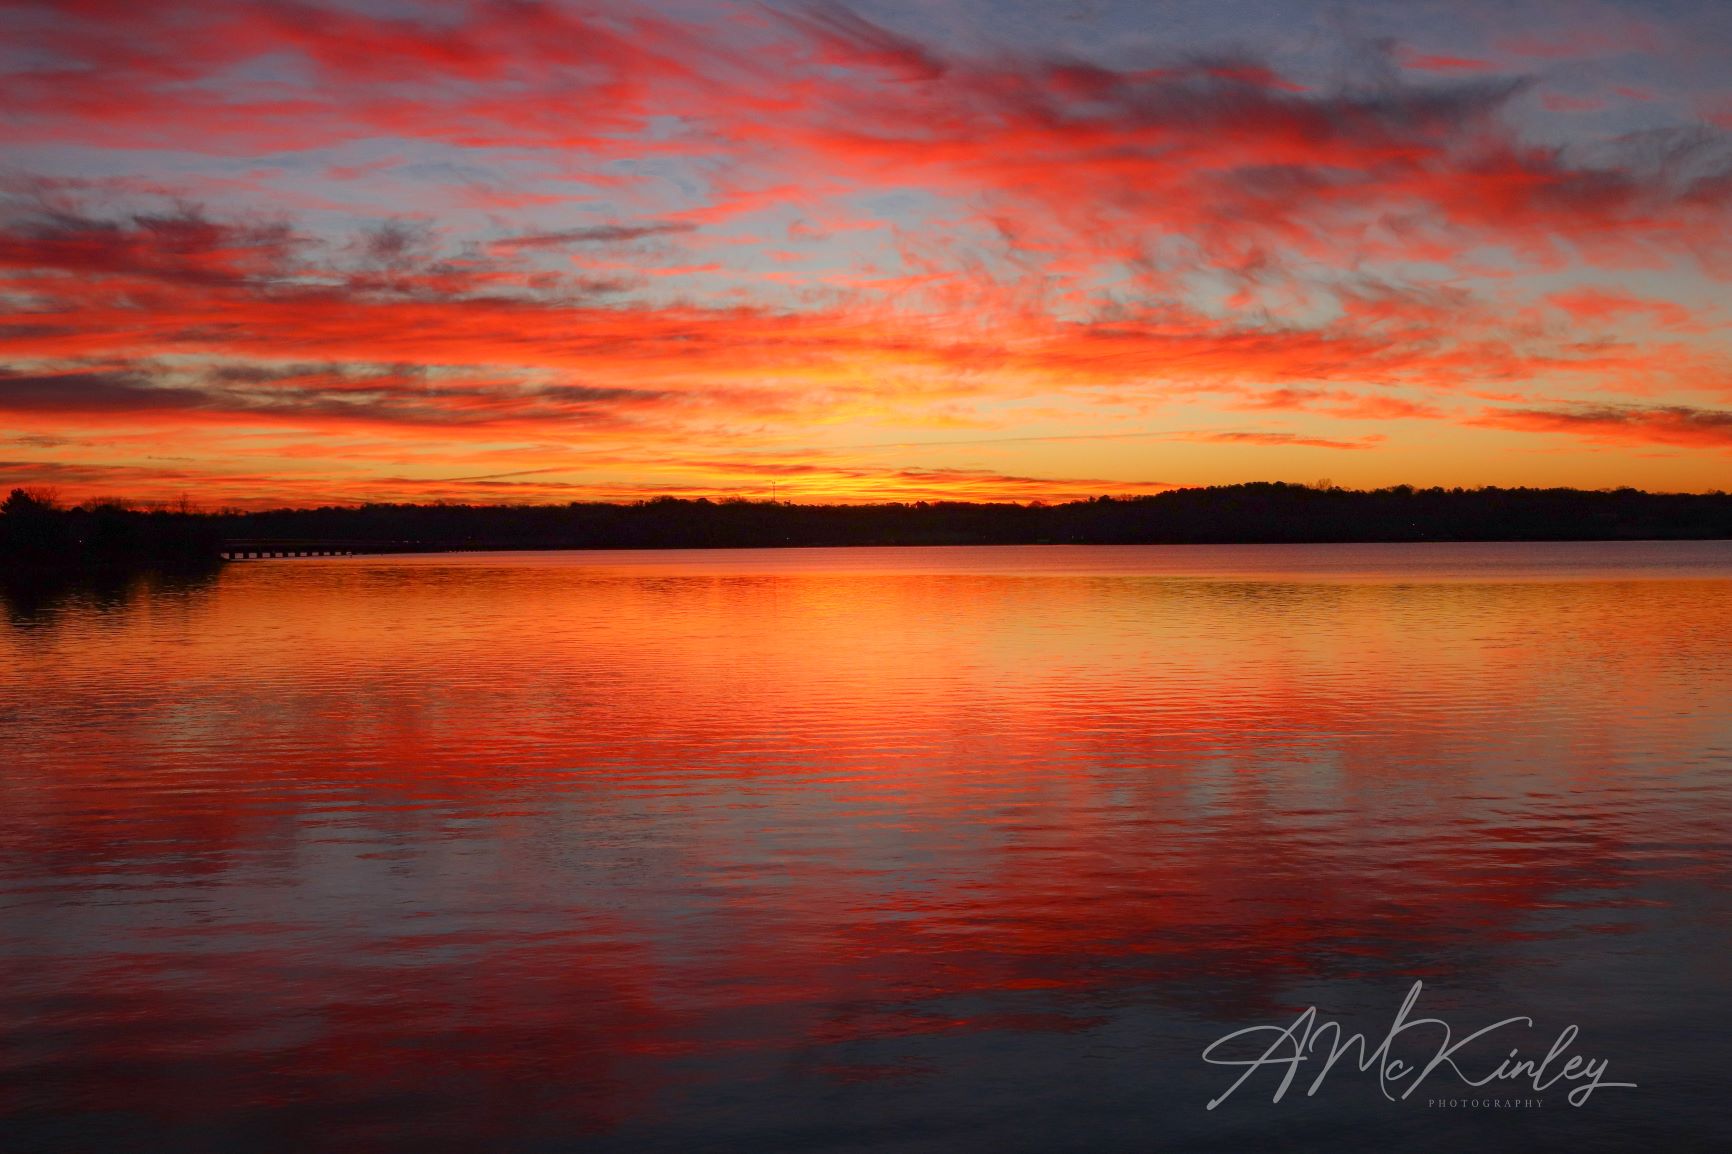 Sunrise over a lake with vivid orange, red, and yellow colors. Photo courtesy of A.McKinley photography